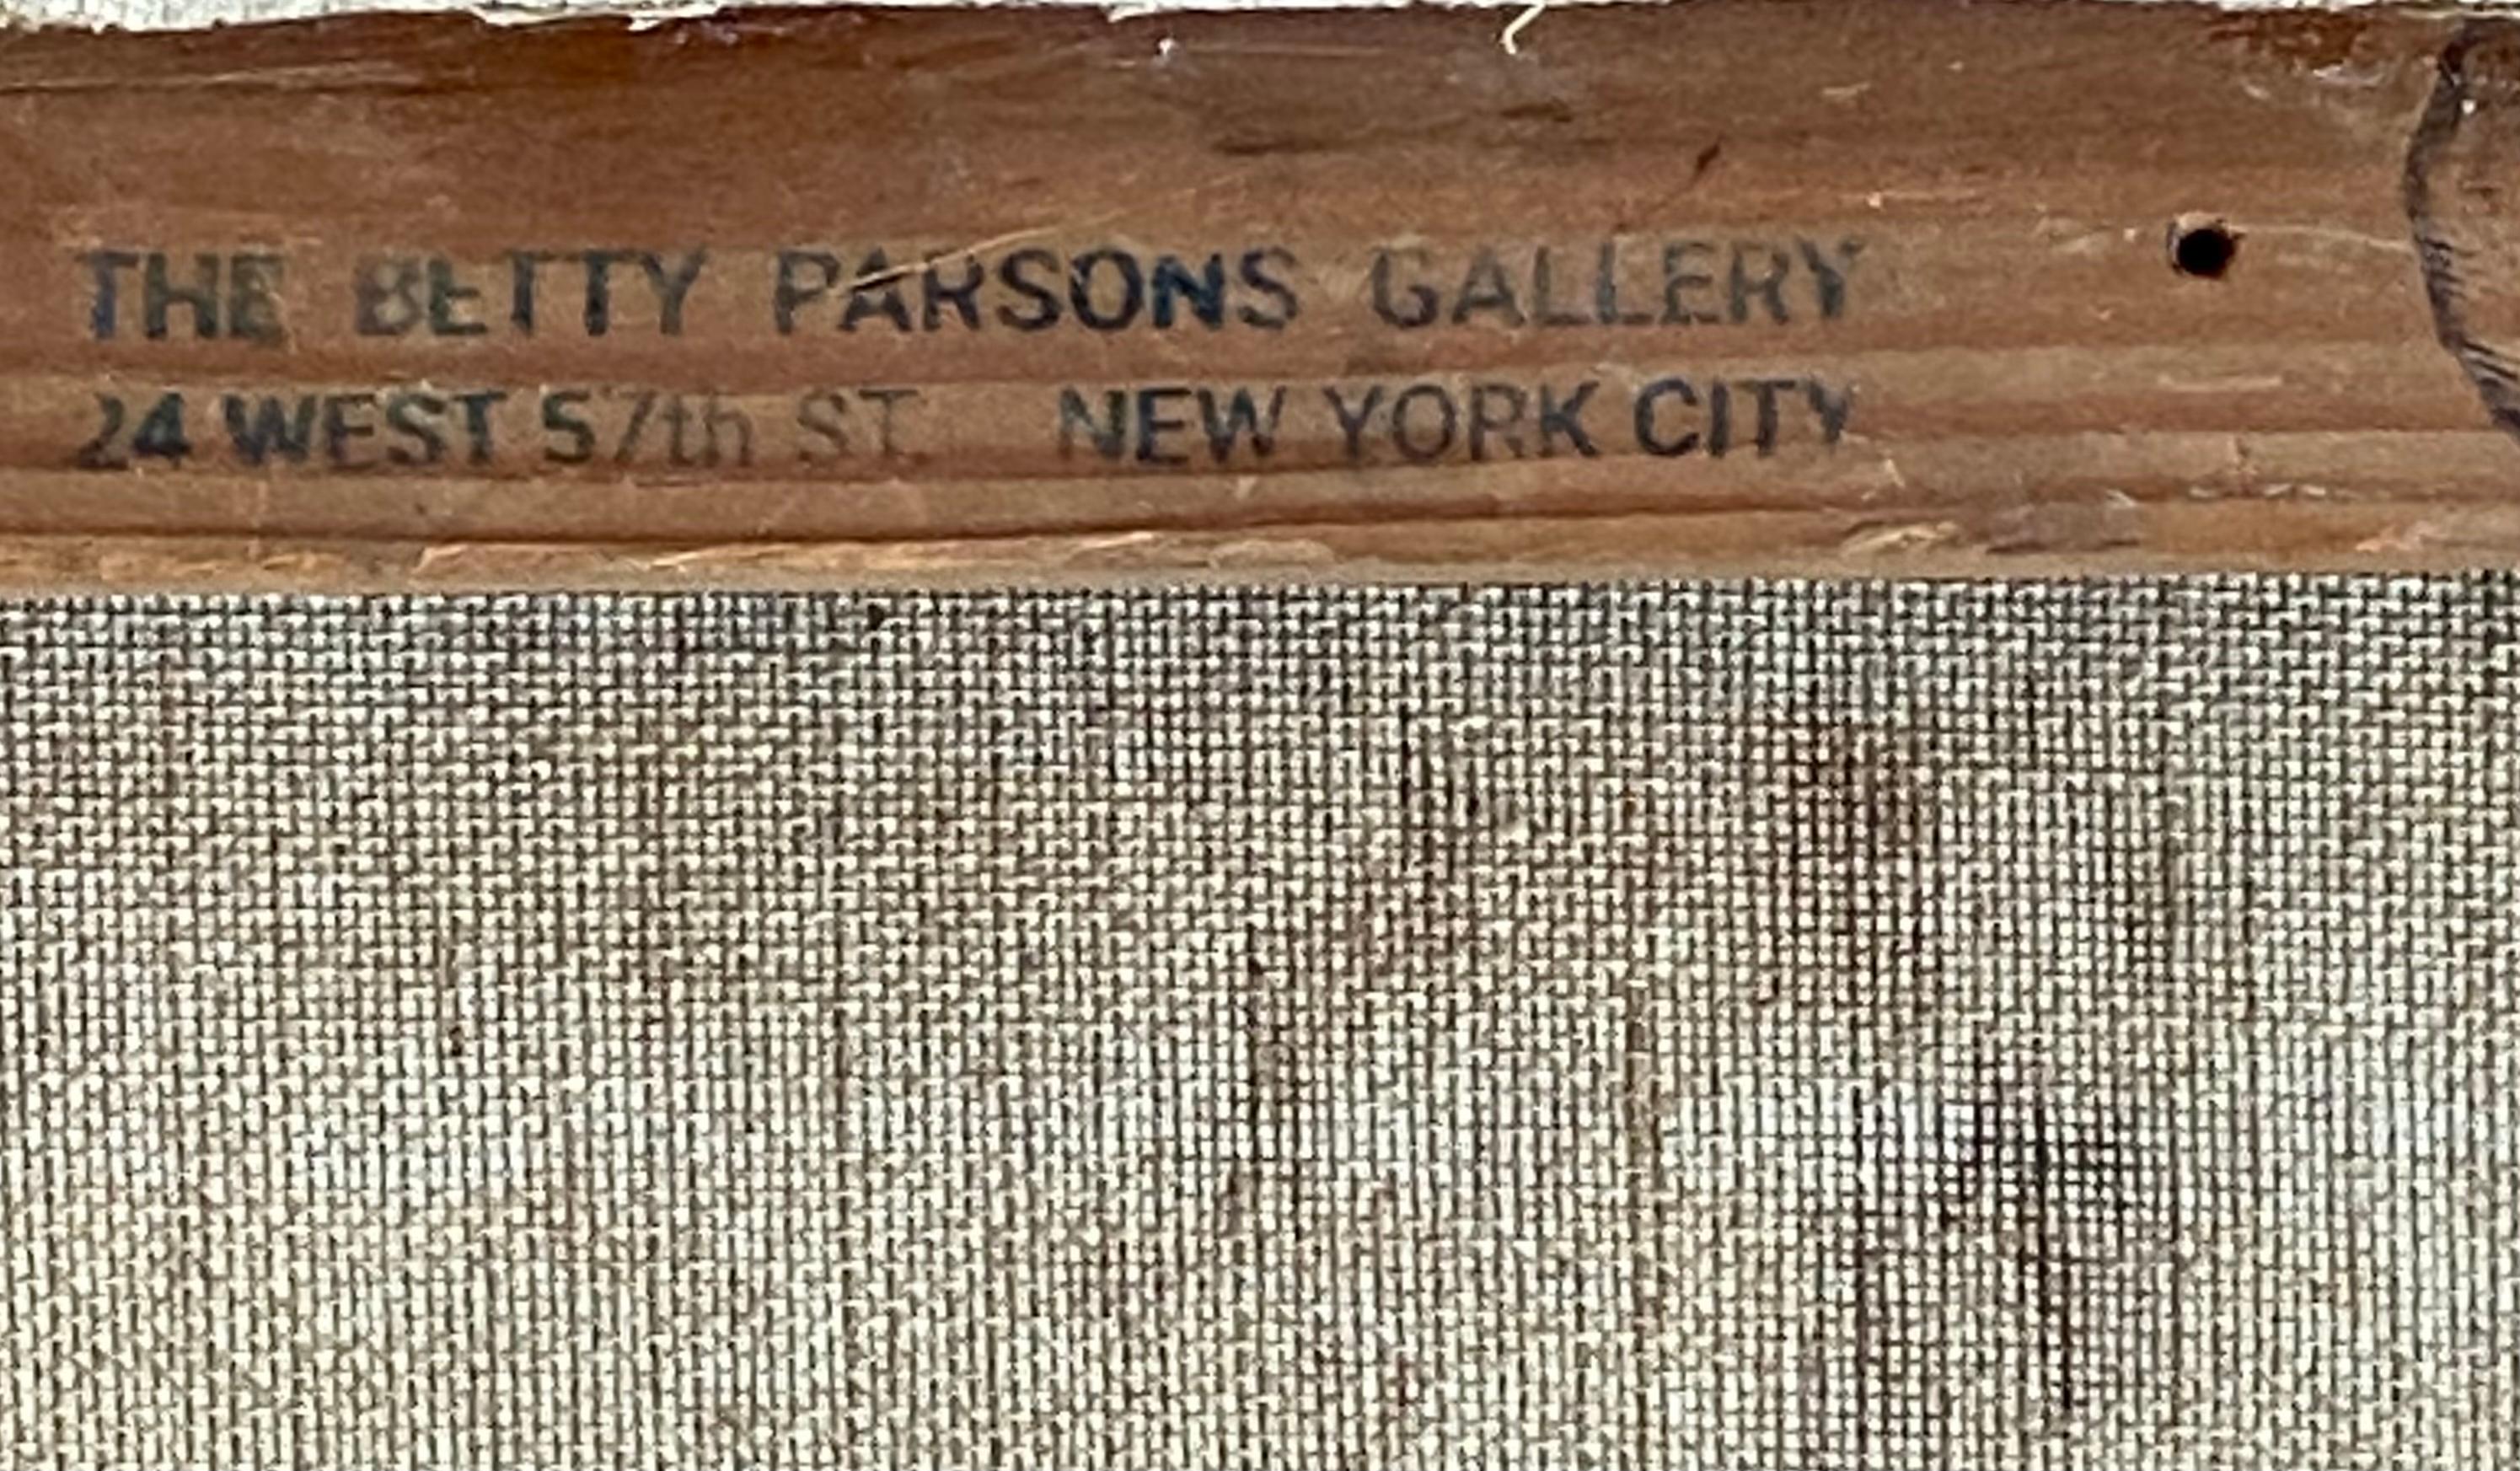 Original oil on canvas painting by the well known abstract expressionist artist, John Little.  Signed lower right. Signed and dated 1965 on top stretcher bar verso.  Betty Parsons Gallery stamp verso on top stretcher bar.  Betty Parsons Gallery was